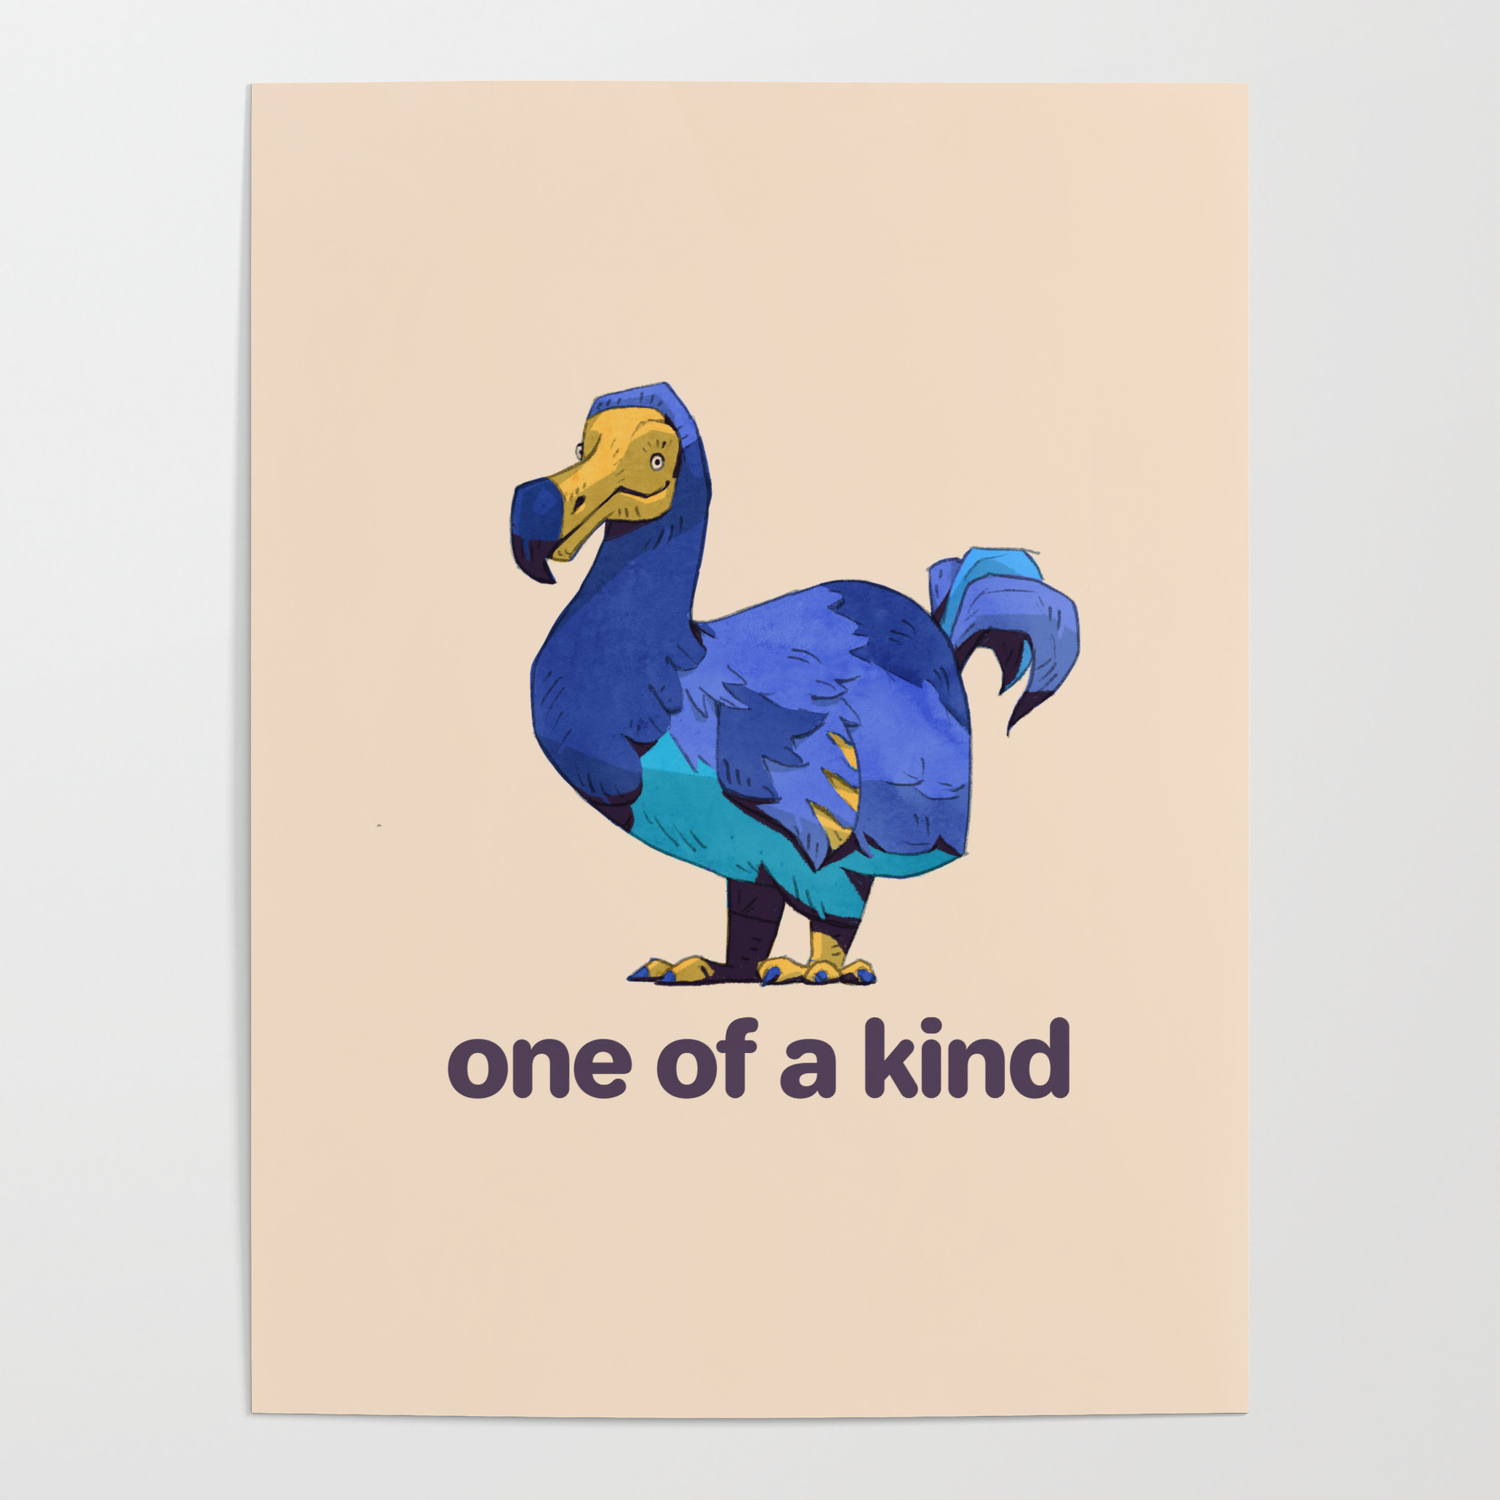 Dodo Bird - One of a Kind Poster by Robinson Wood | Society6